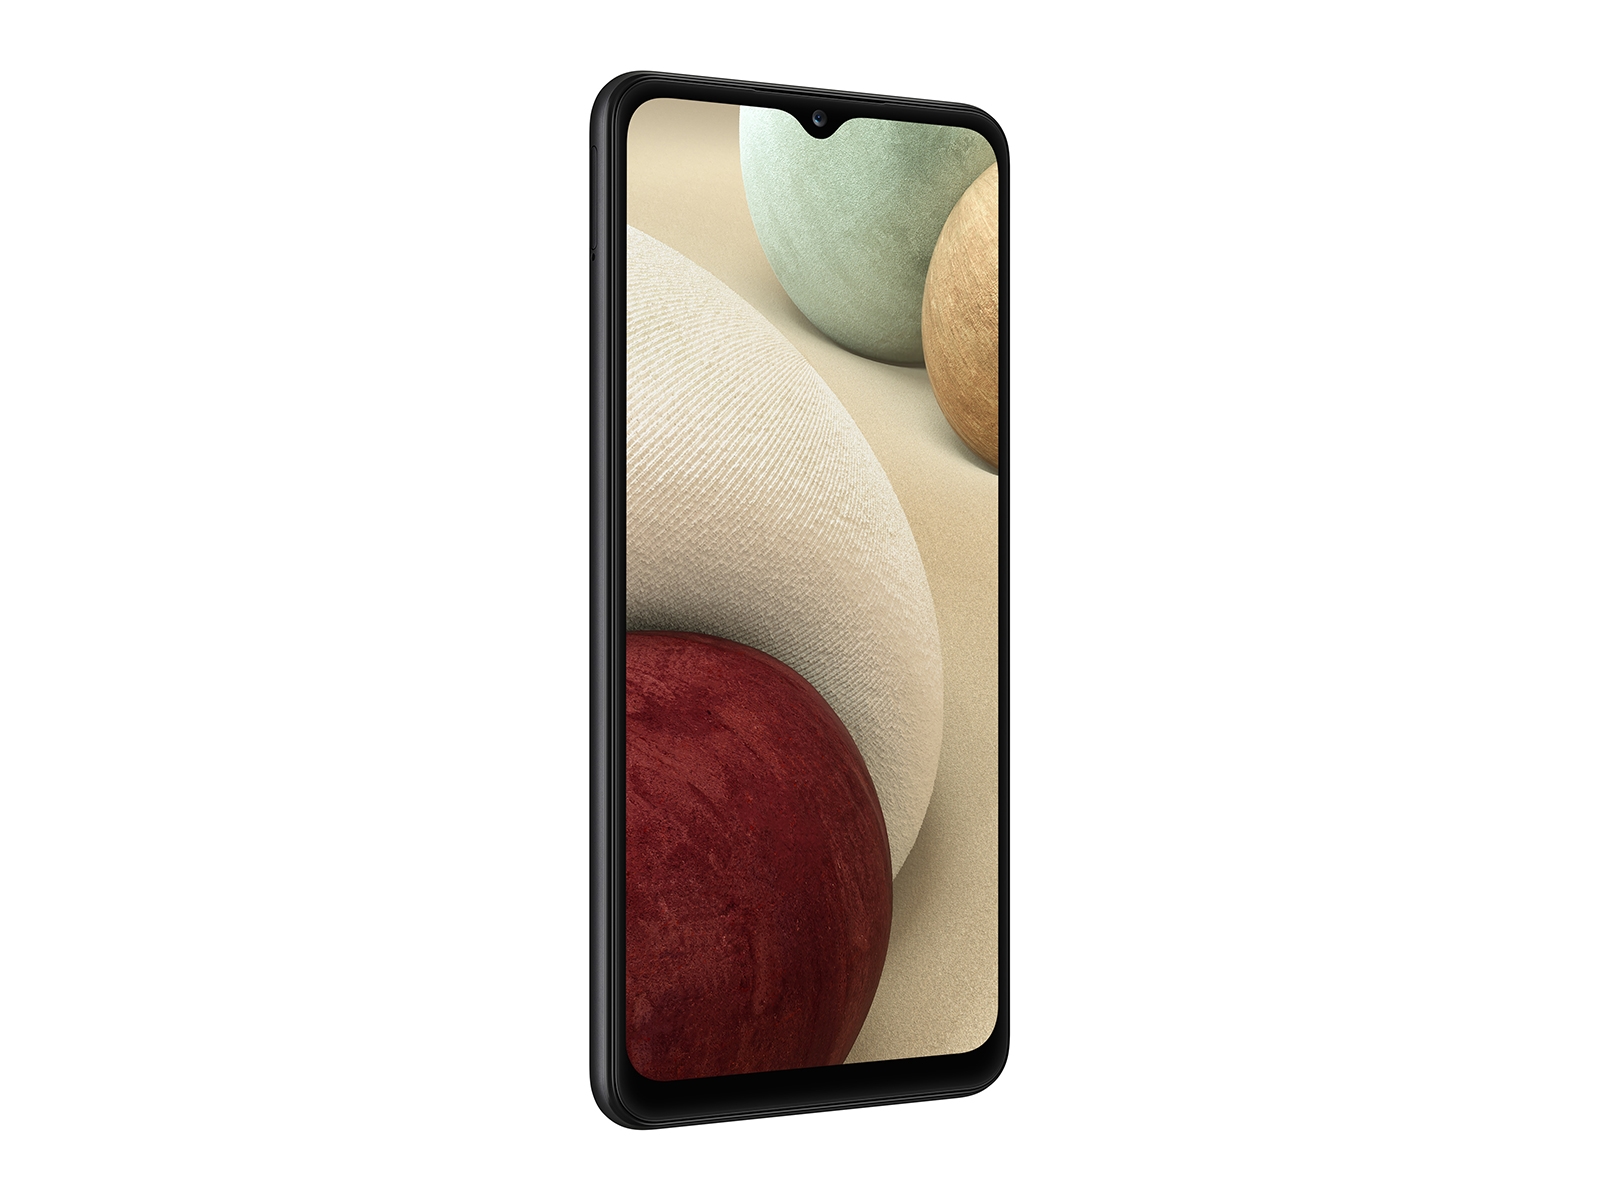 Thumbnail image of Galaxy A12 (Metro by T-Mobile)